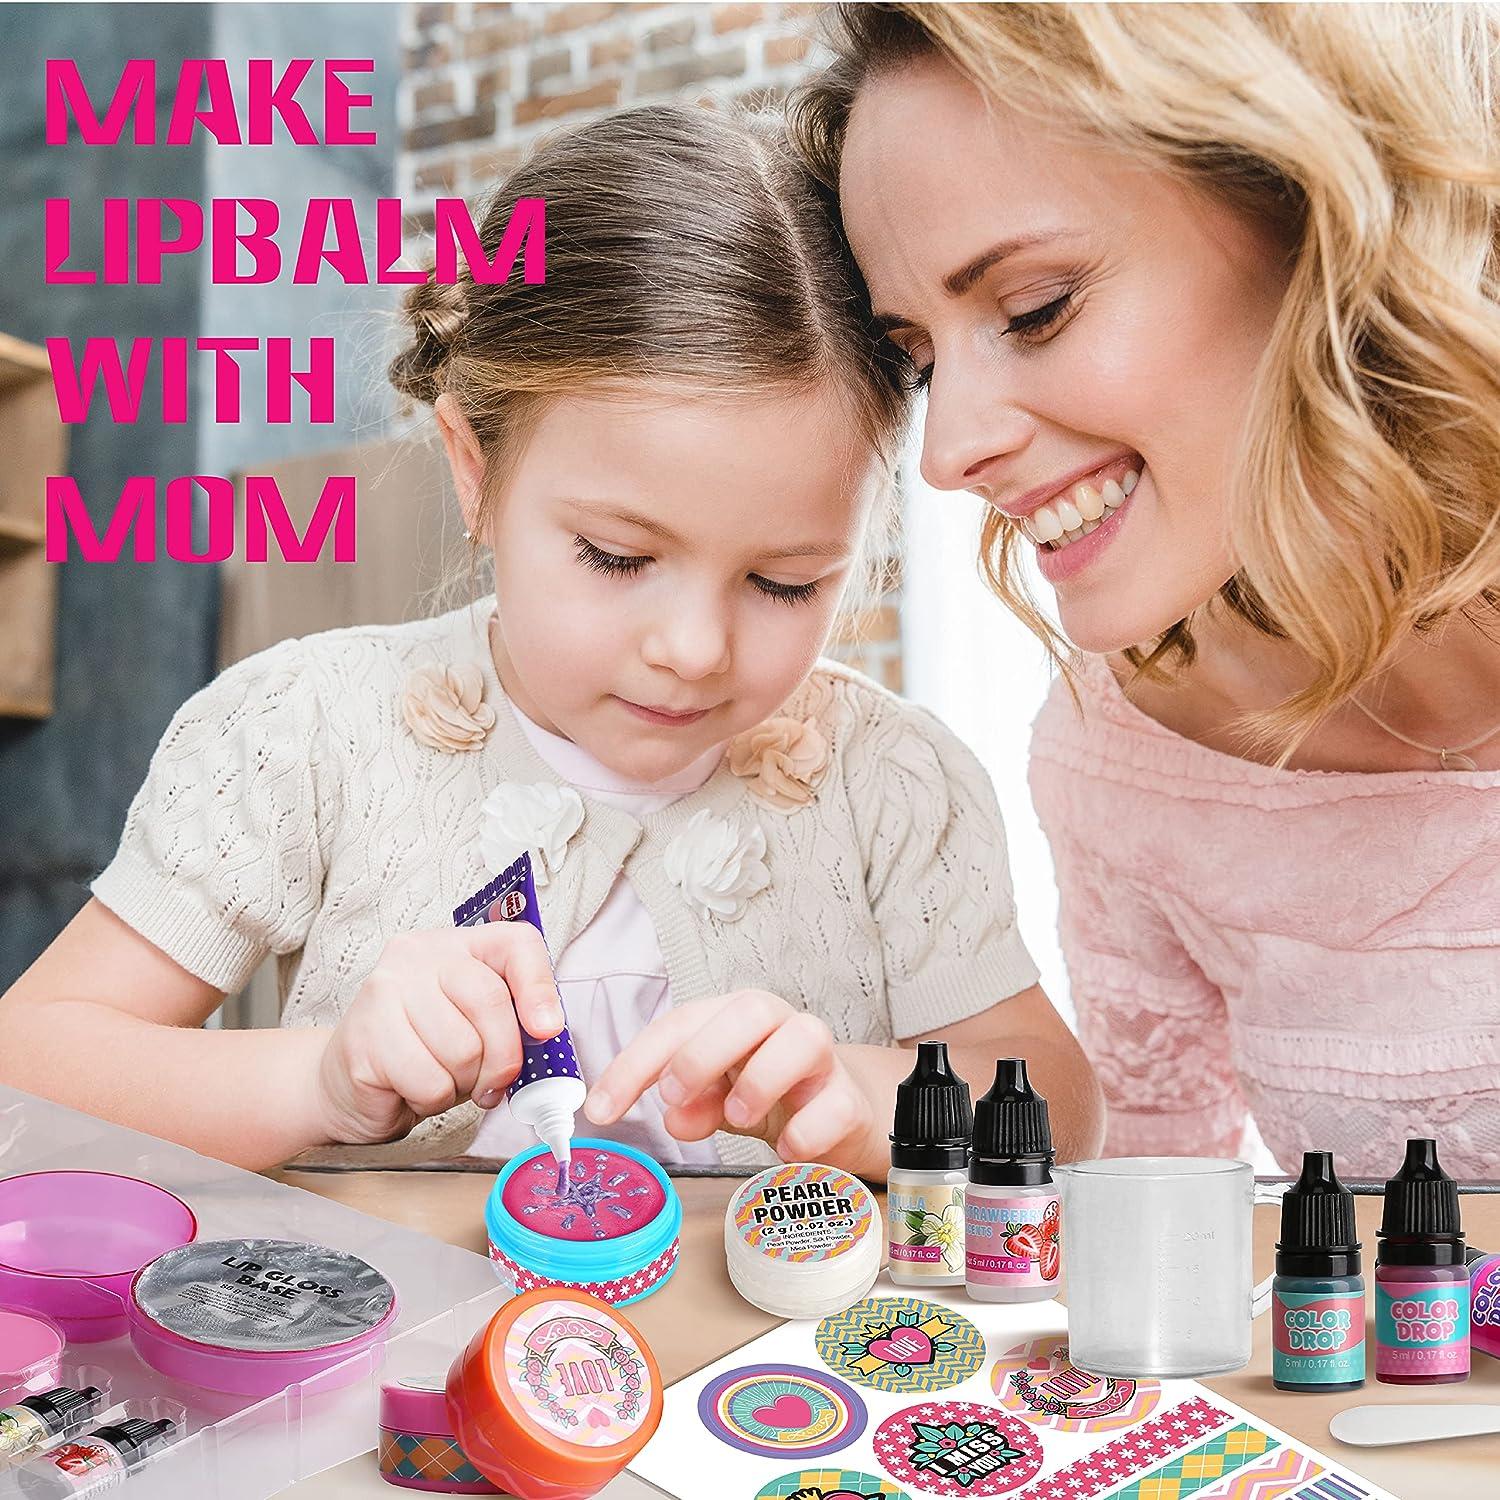 for Girls Ages 8-12 Gifts for 7 8 9 10 11 Year Old Girls, Kids Nail Polish  Set for Girls 10-12 Years Old Birthday Gift Ideas Nail Art Kit for Kid Girls